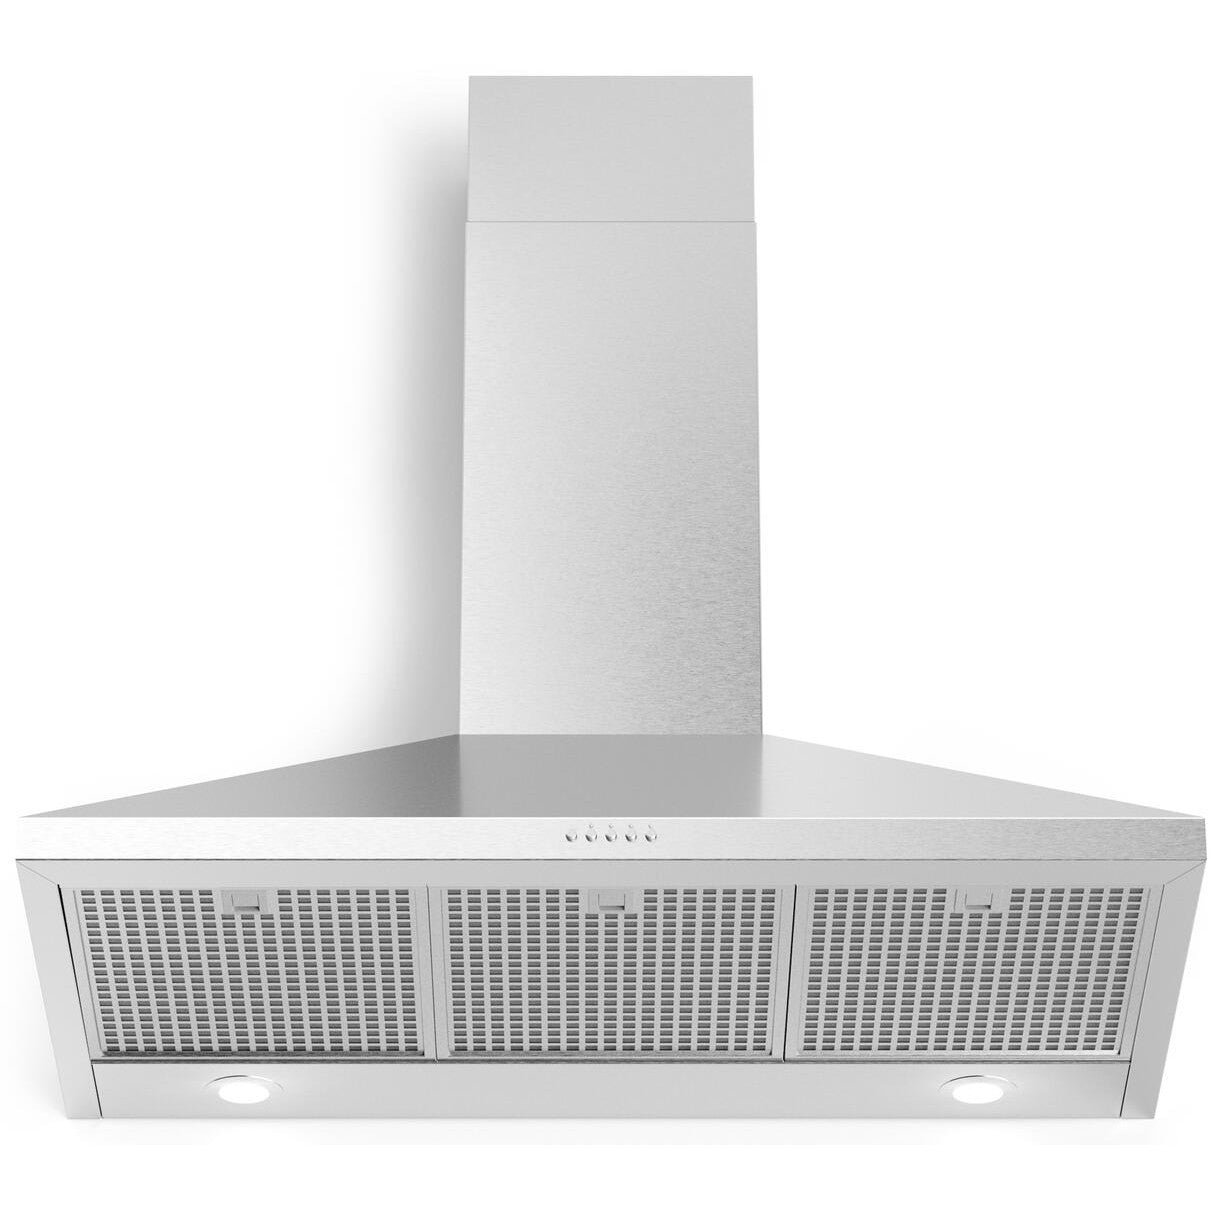 Forte Bravo 36" 600 CFM Convertible Residential Round Duct Stainless Steel Wall Mount Range Hood With Chimney Extension, Recirculating Kit, Charcoal Filters, and LED Lighting